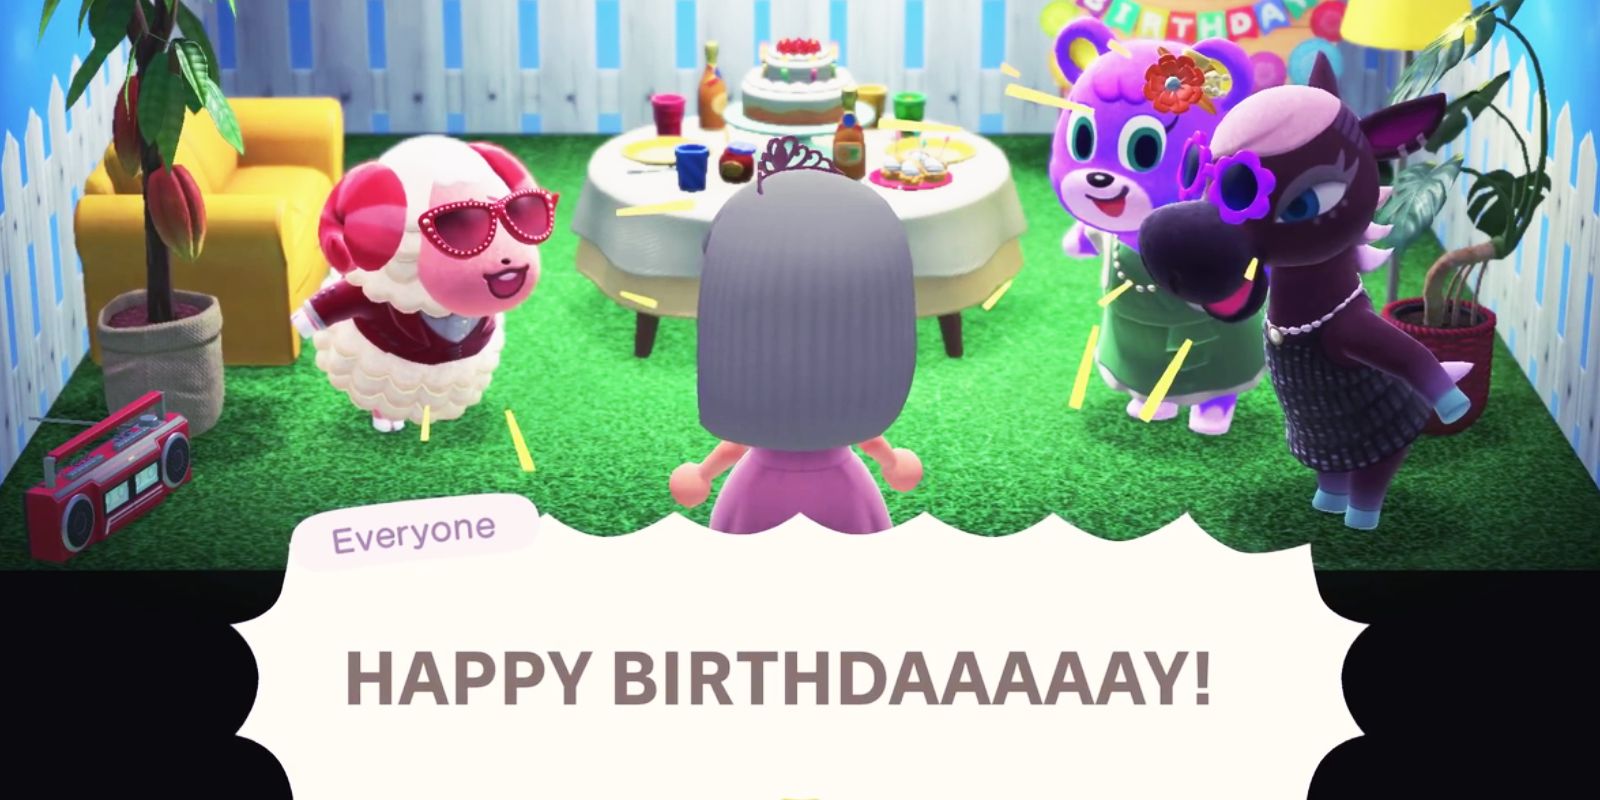 What Happens In Animal Crossing If You Ignore Villagers' Birthdays